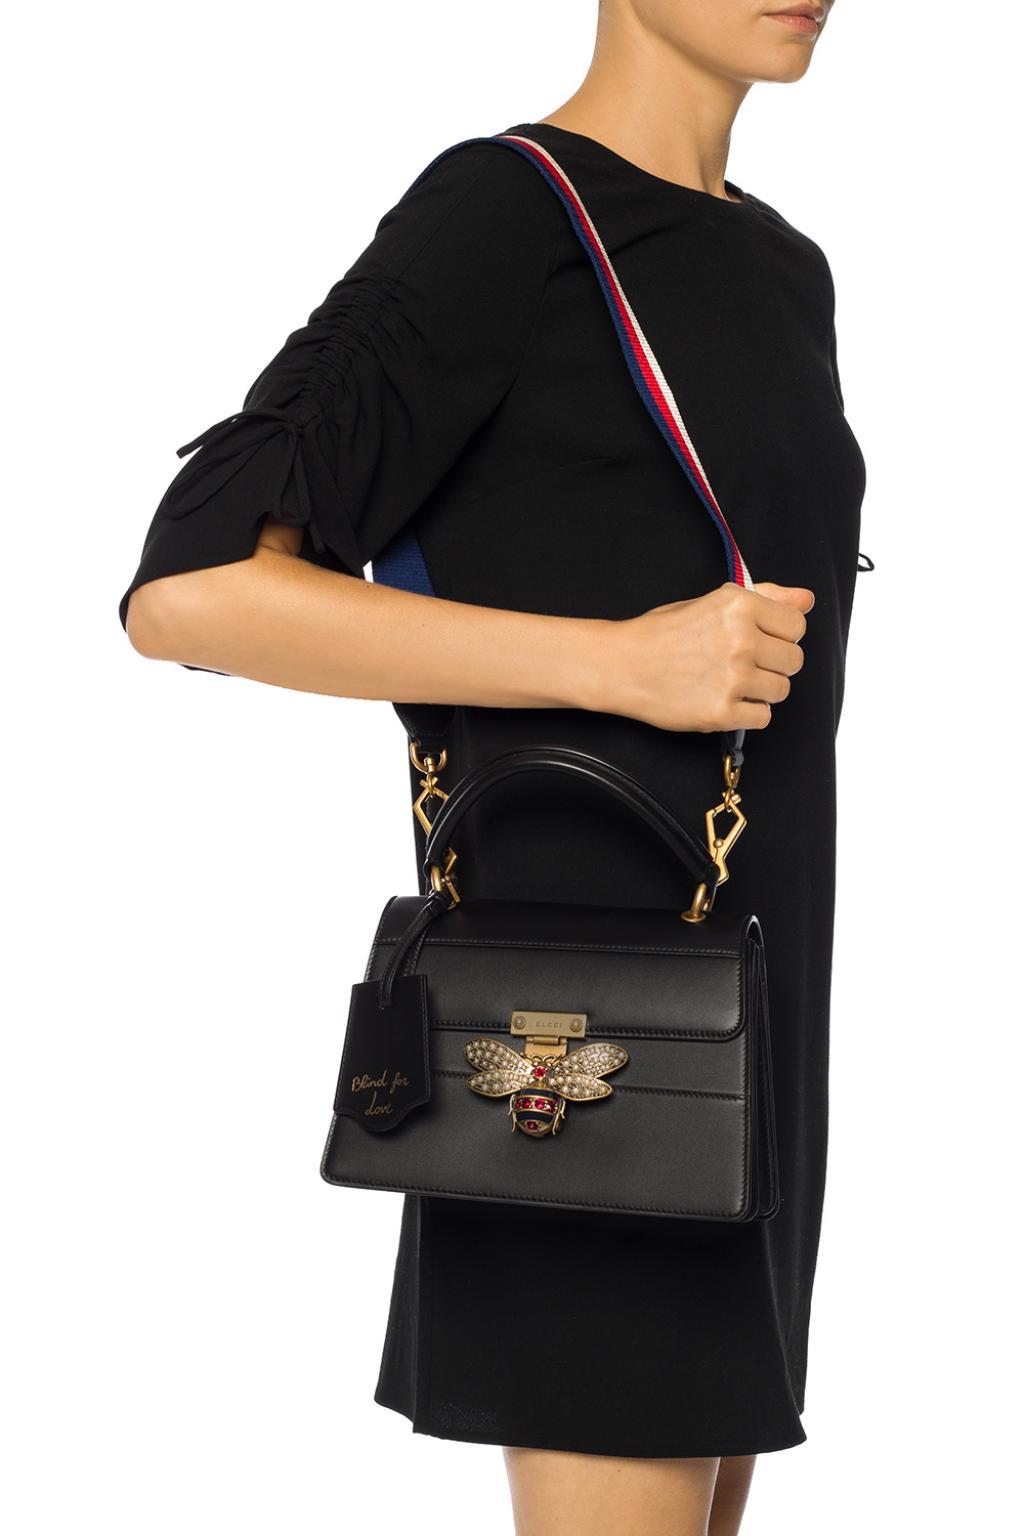 Gucci Soho Leather Tote Crossbody Bag Black – Queen Bee of Beverly Hills